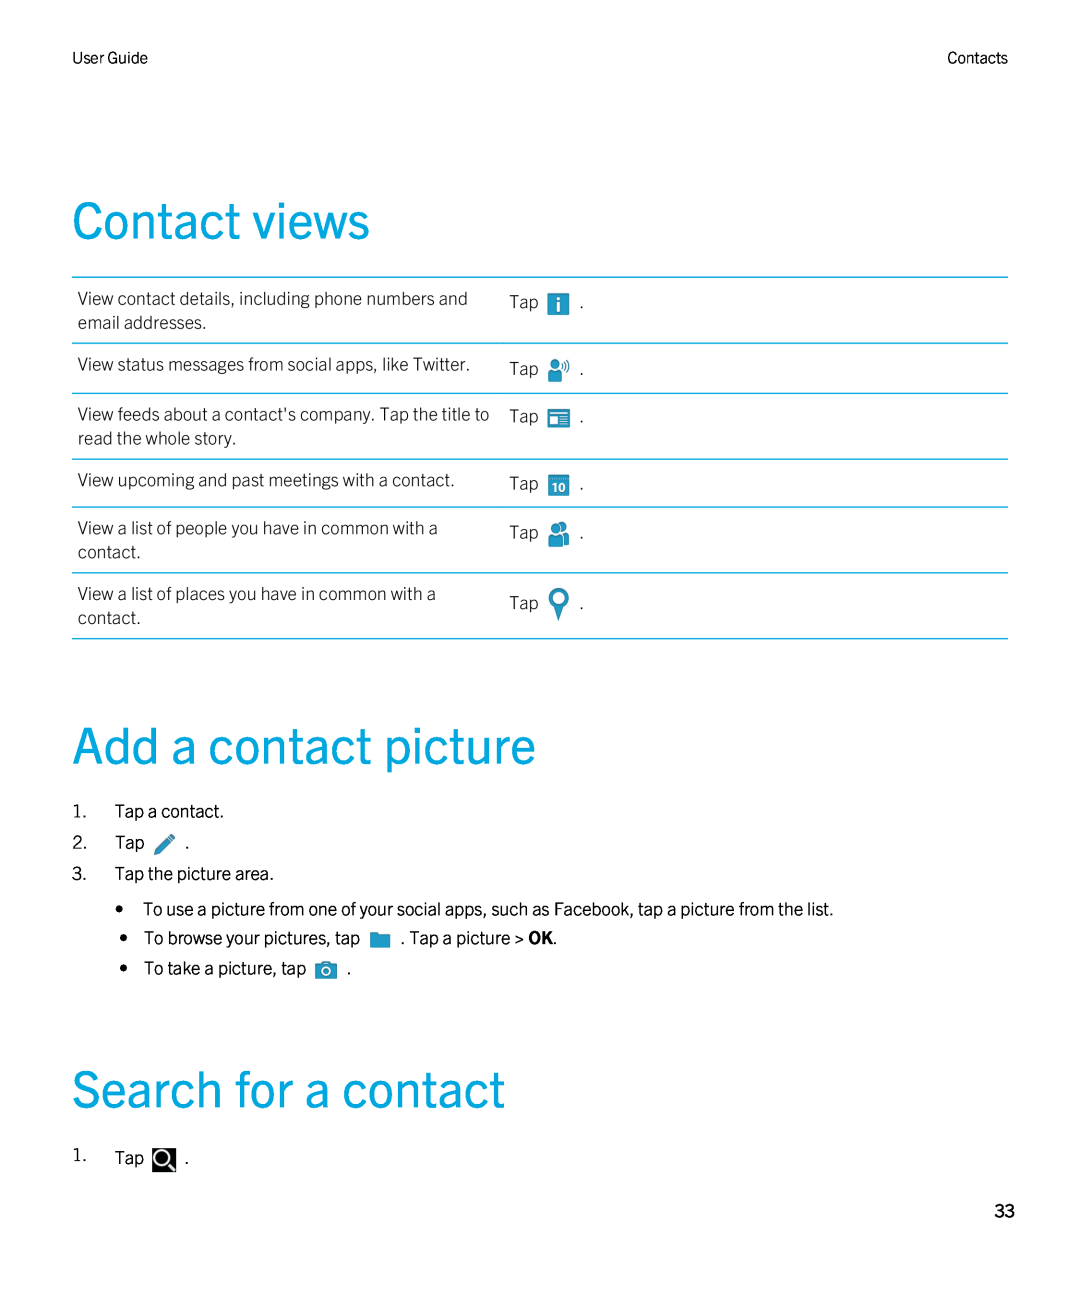 Blackberry 2.0.1 manual Contact views, Add a contact picture, Search for a contact 